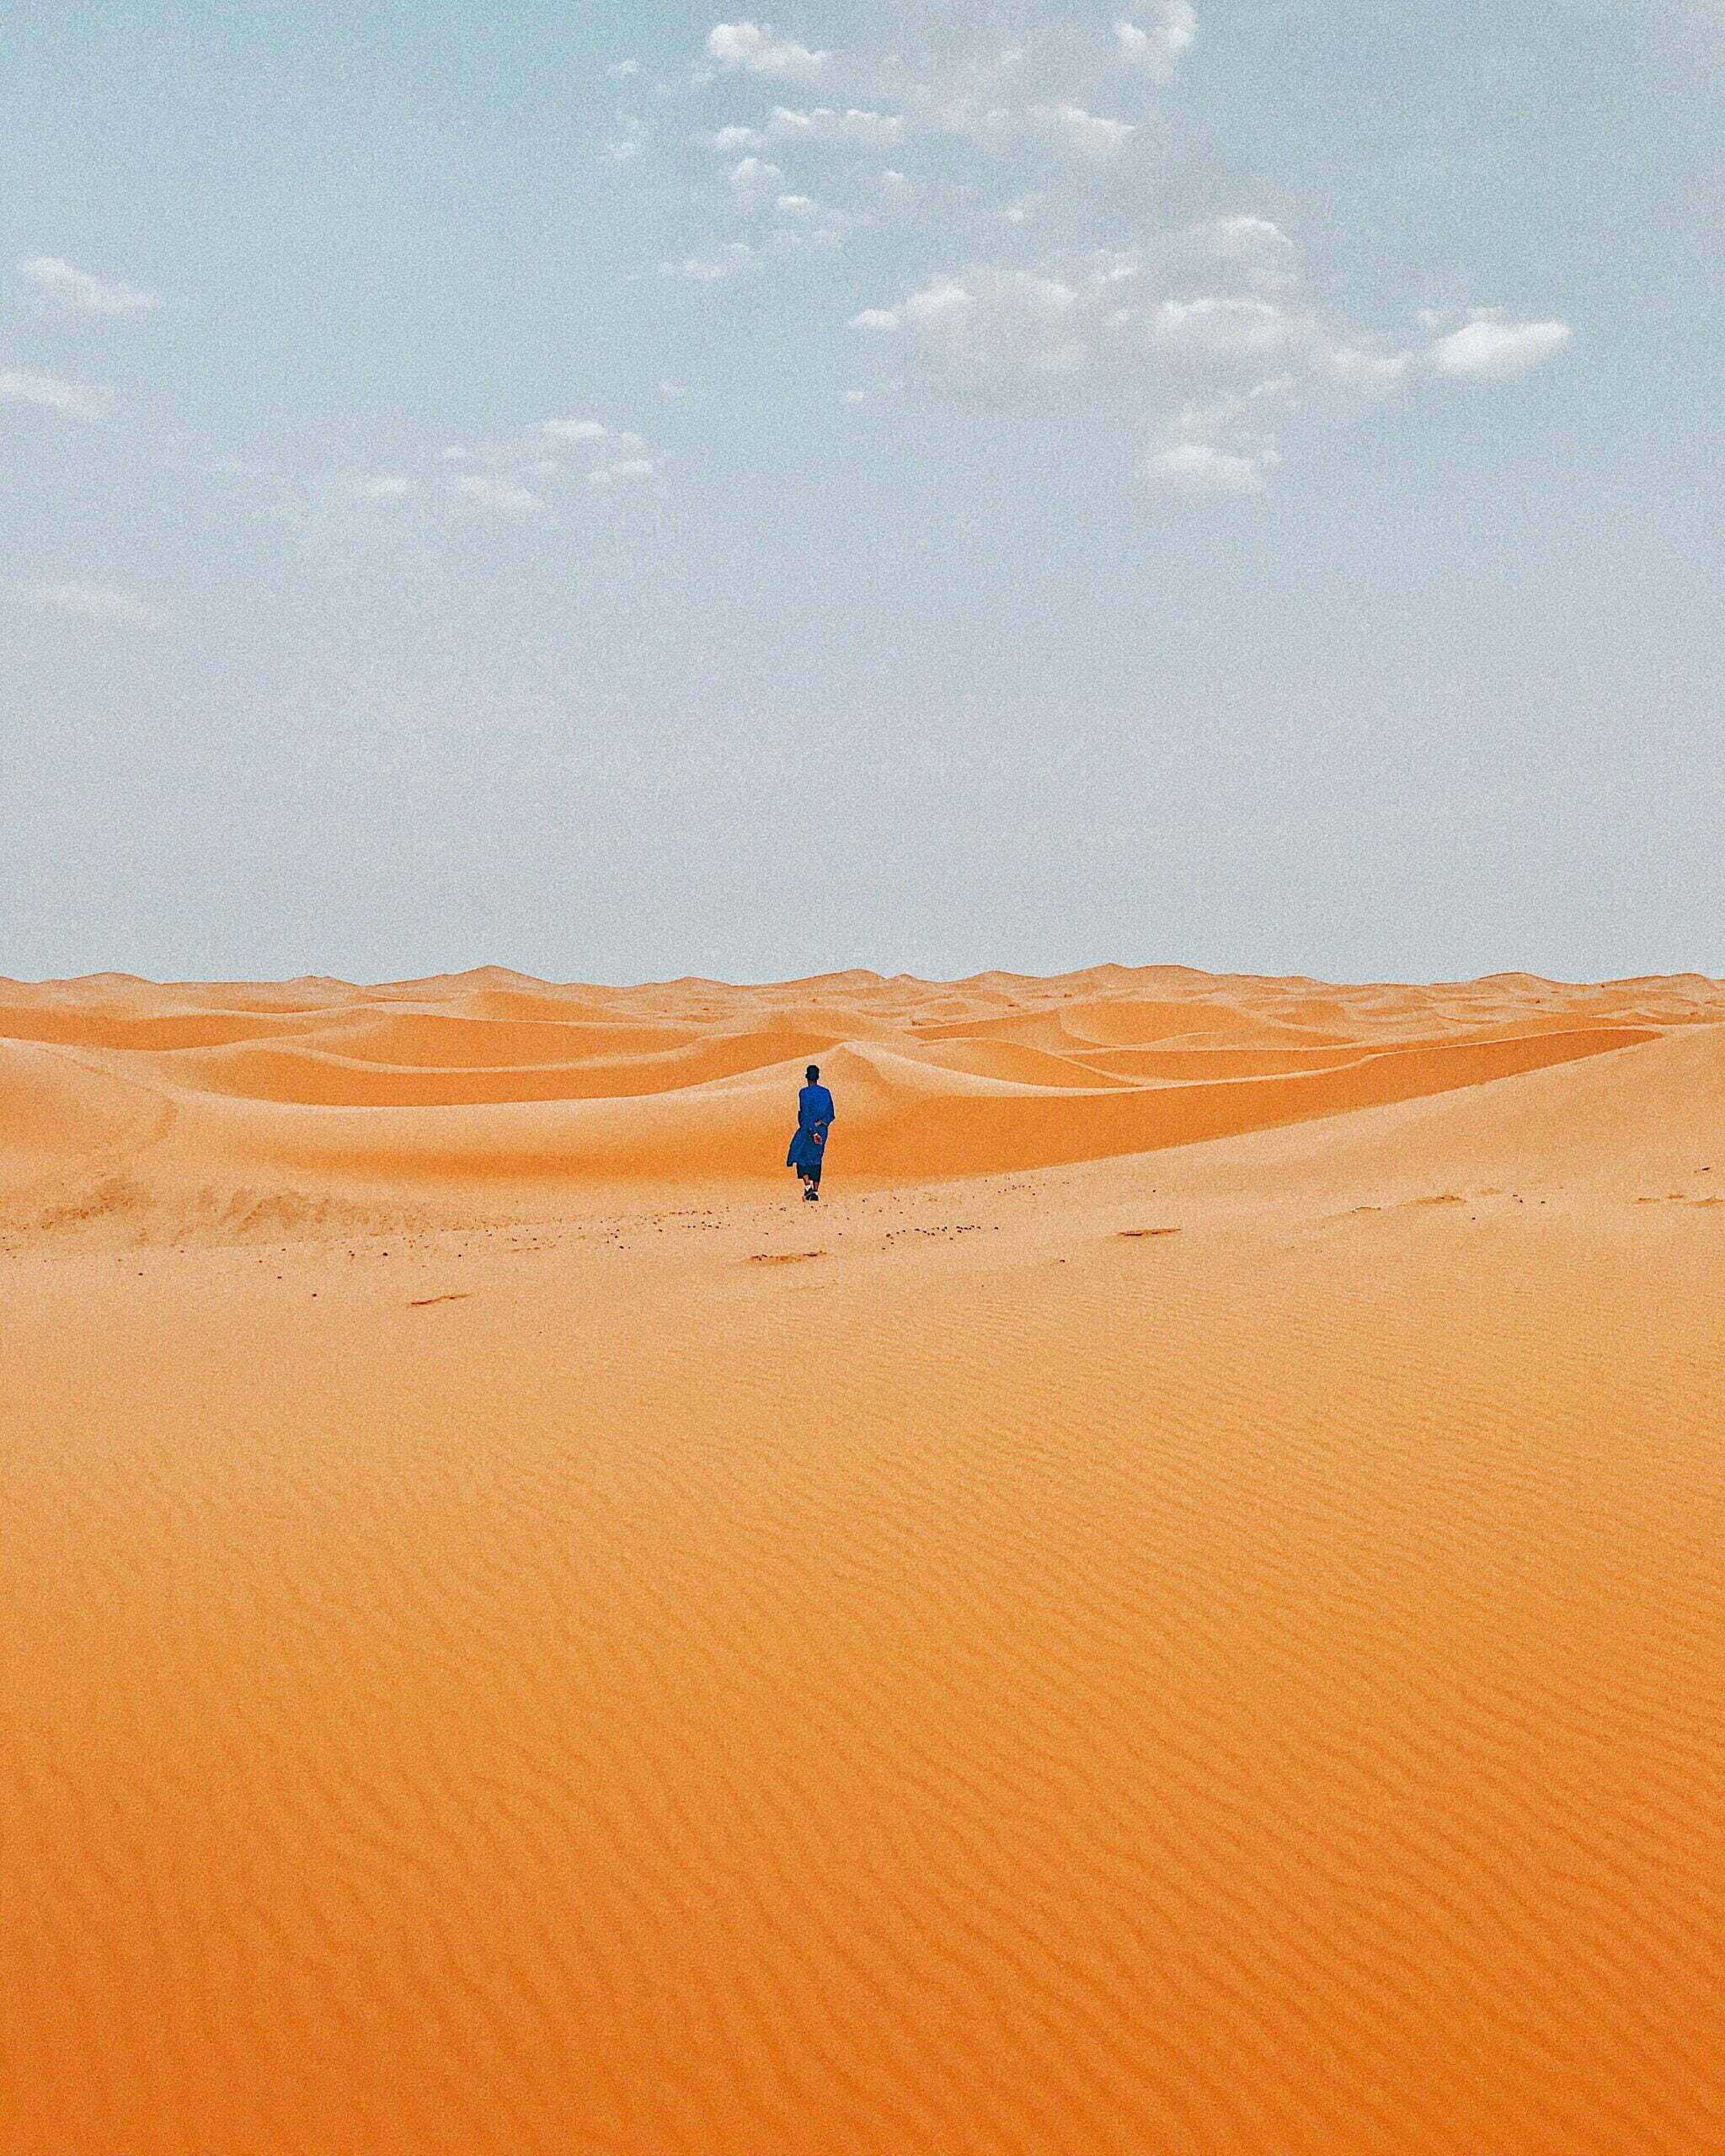 desert with lone figure in background